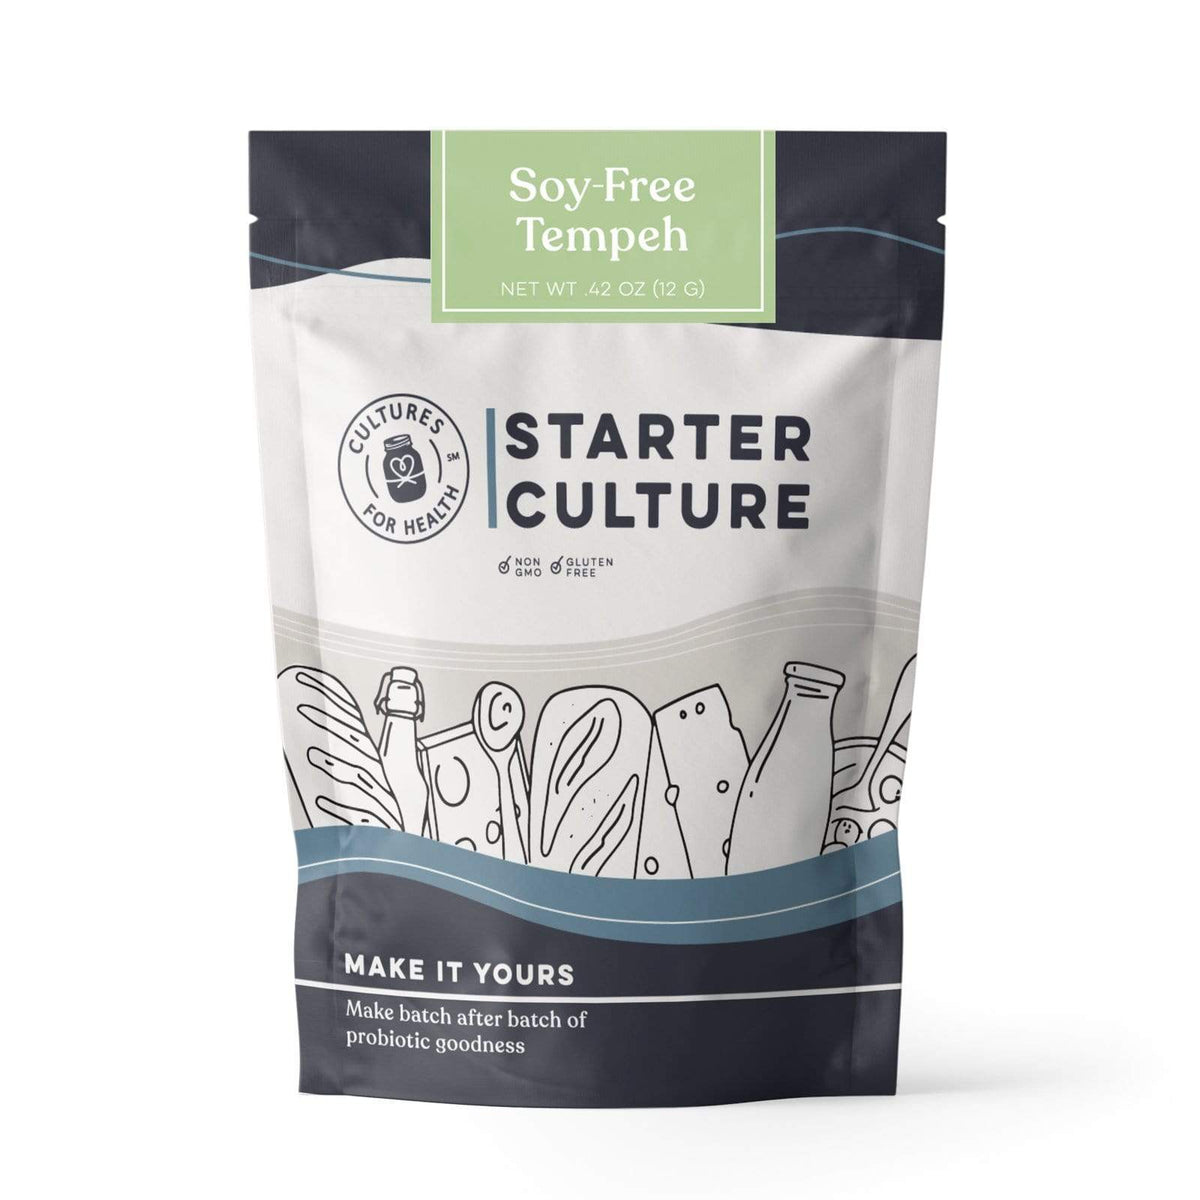 Tempeh &amp; Soy Soy-Free Tempeh Starter Culture